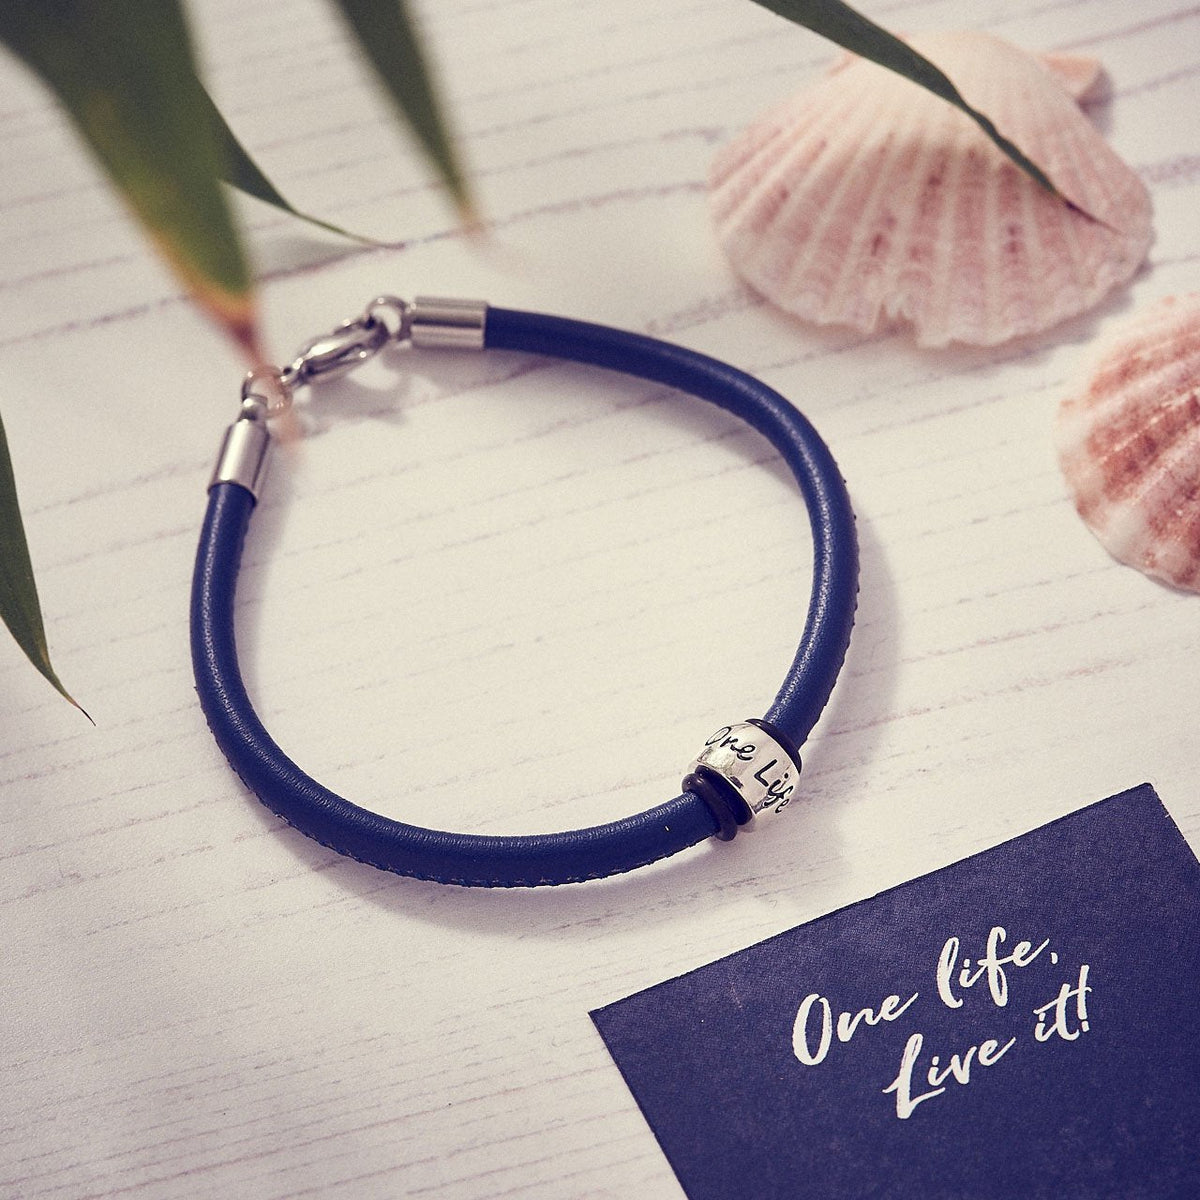 Blue leather &amp; Silver bead charm bracelet engraved One Life Live It for adventurers from Off The Map Brighton